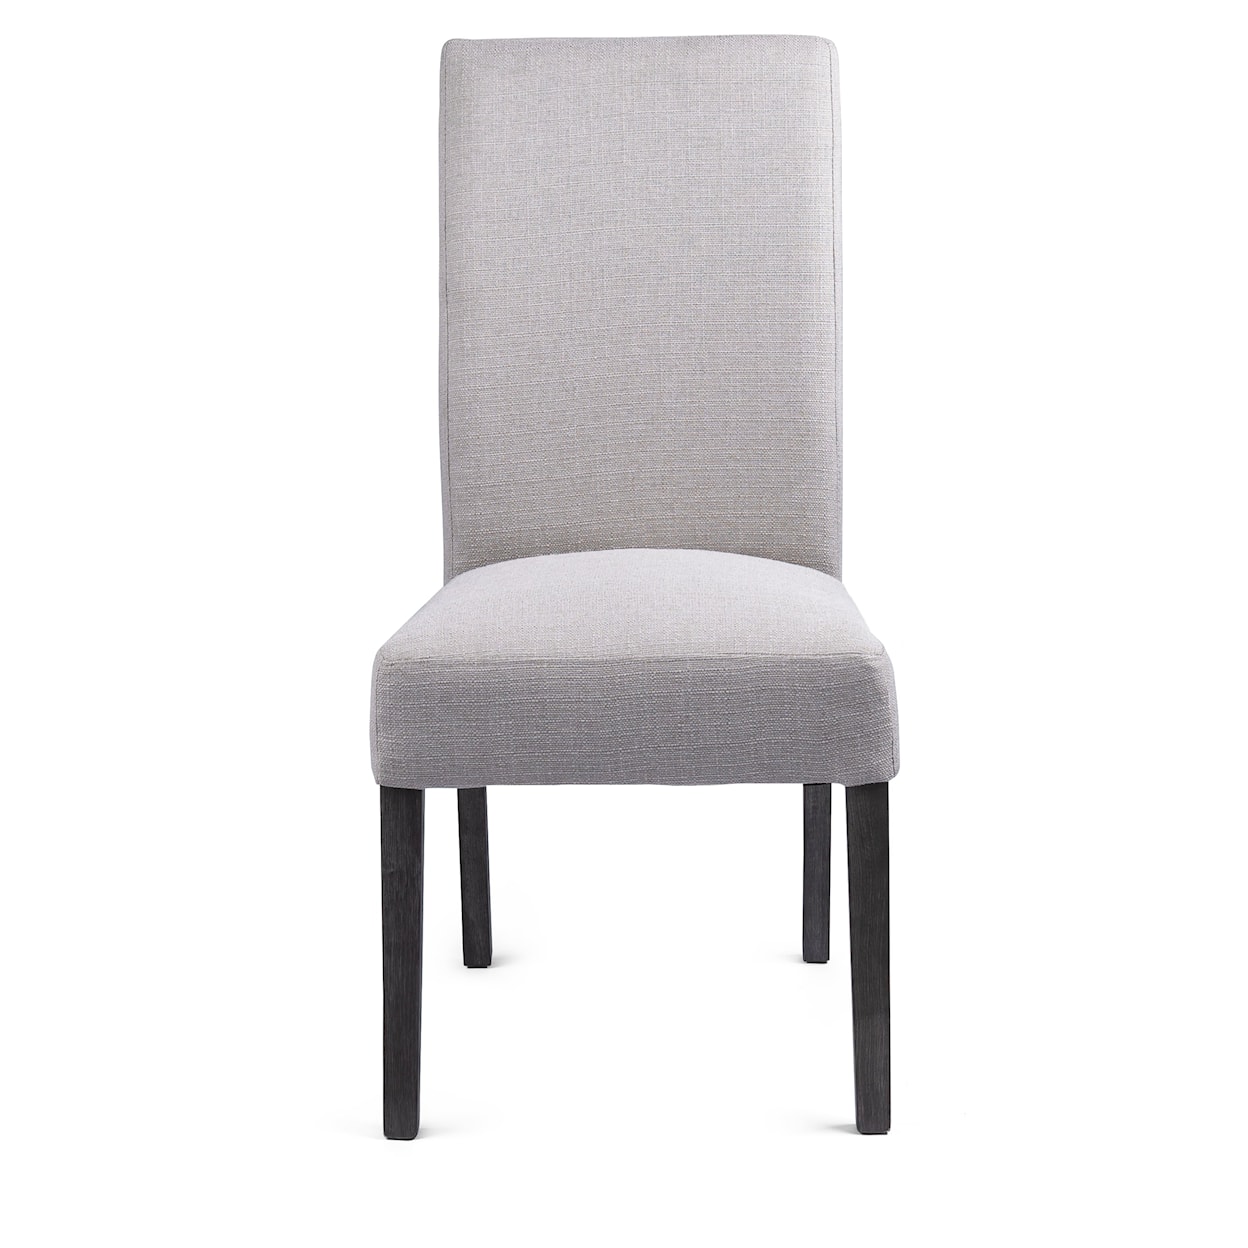 Global Home Austin Dining Chair Kd